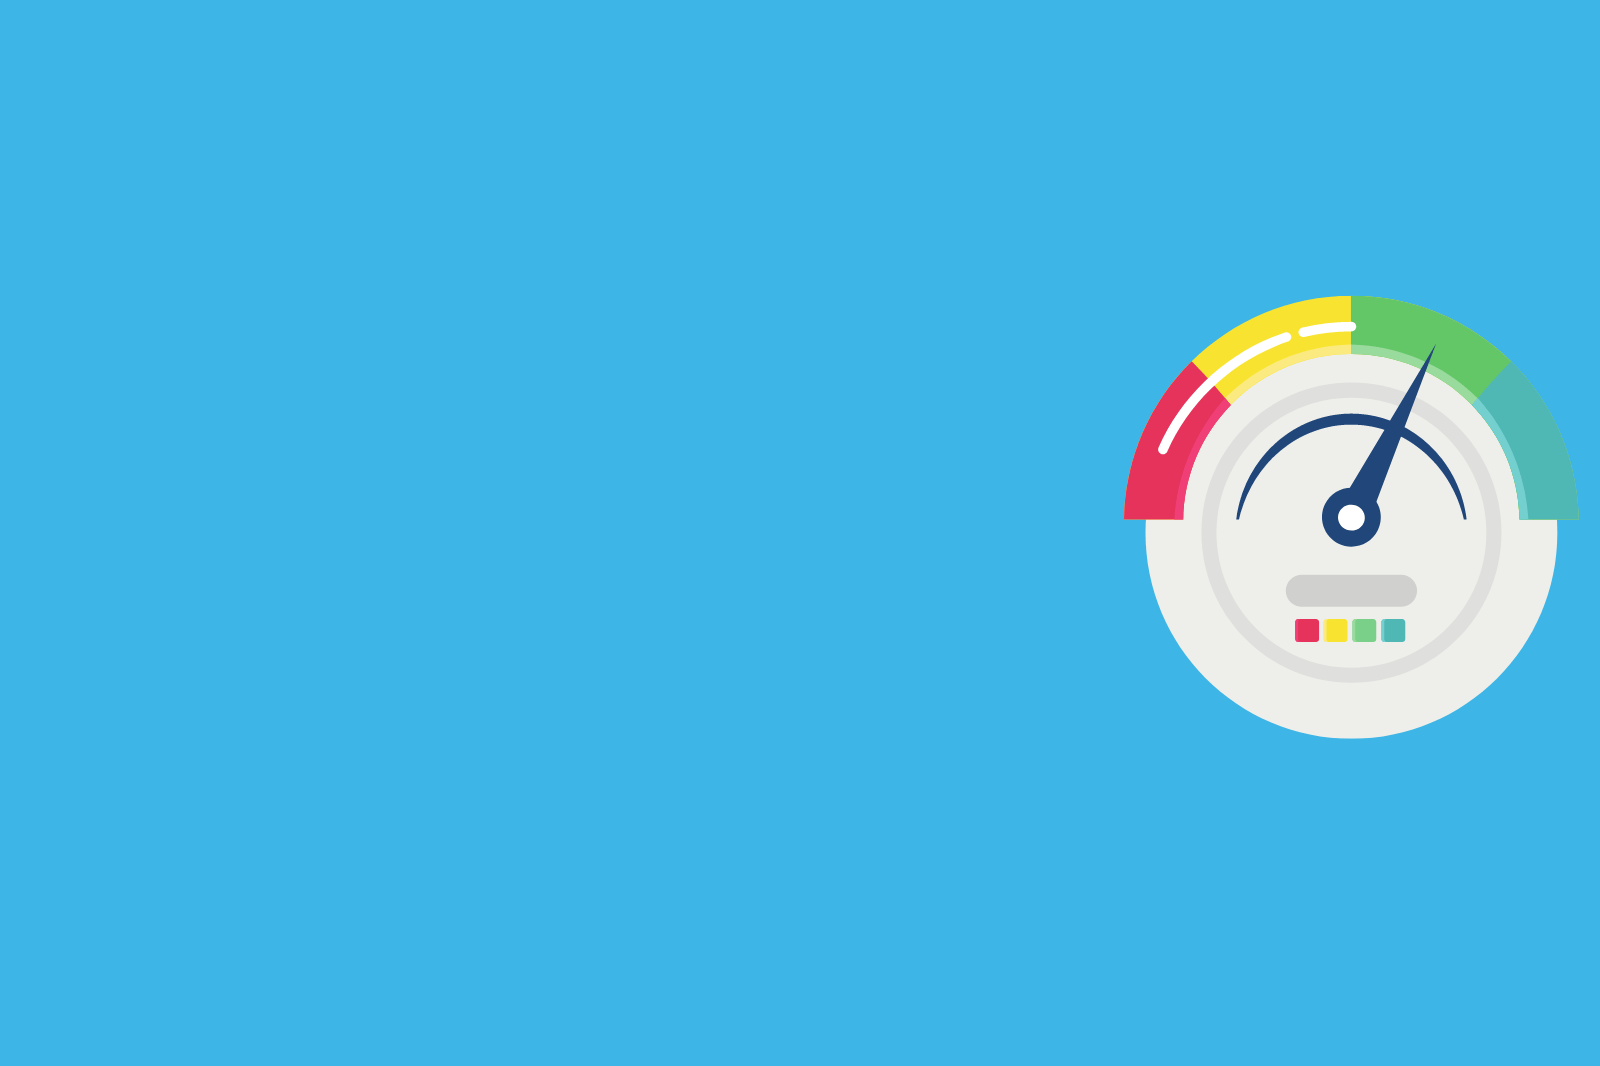 An icon of a speedometer on a blue background, power up the customer experience.